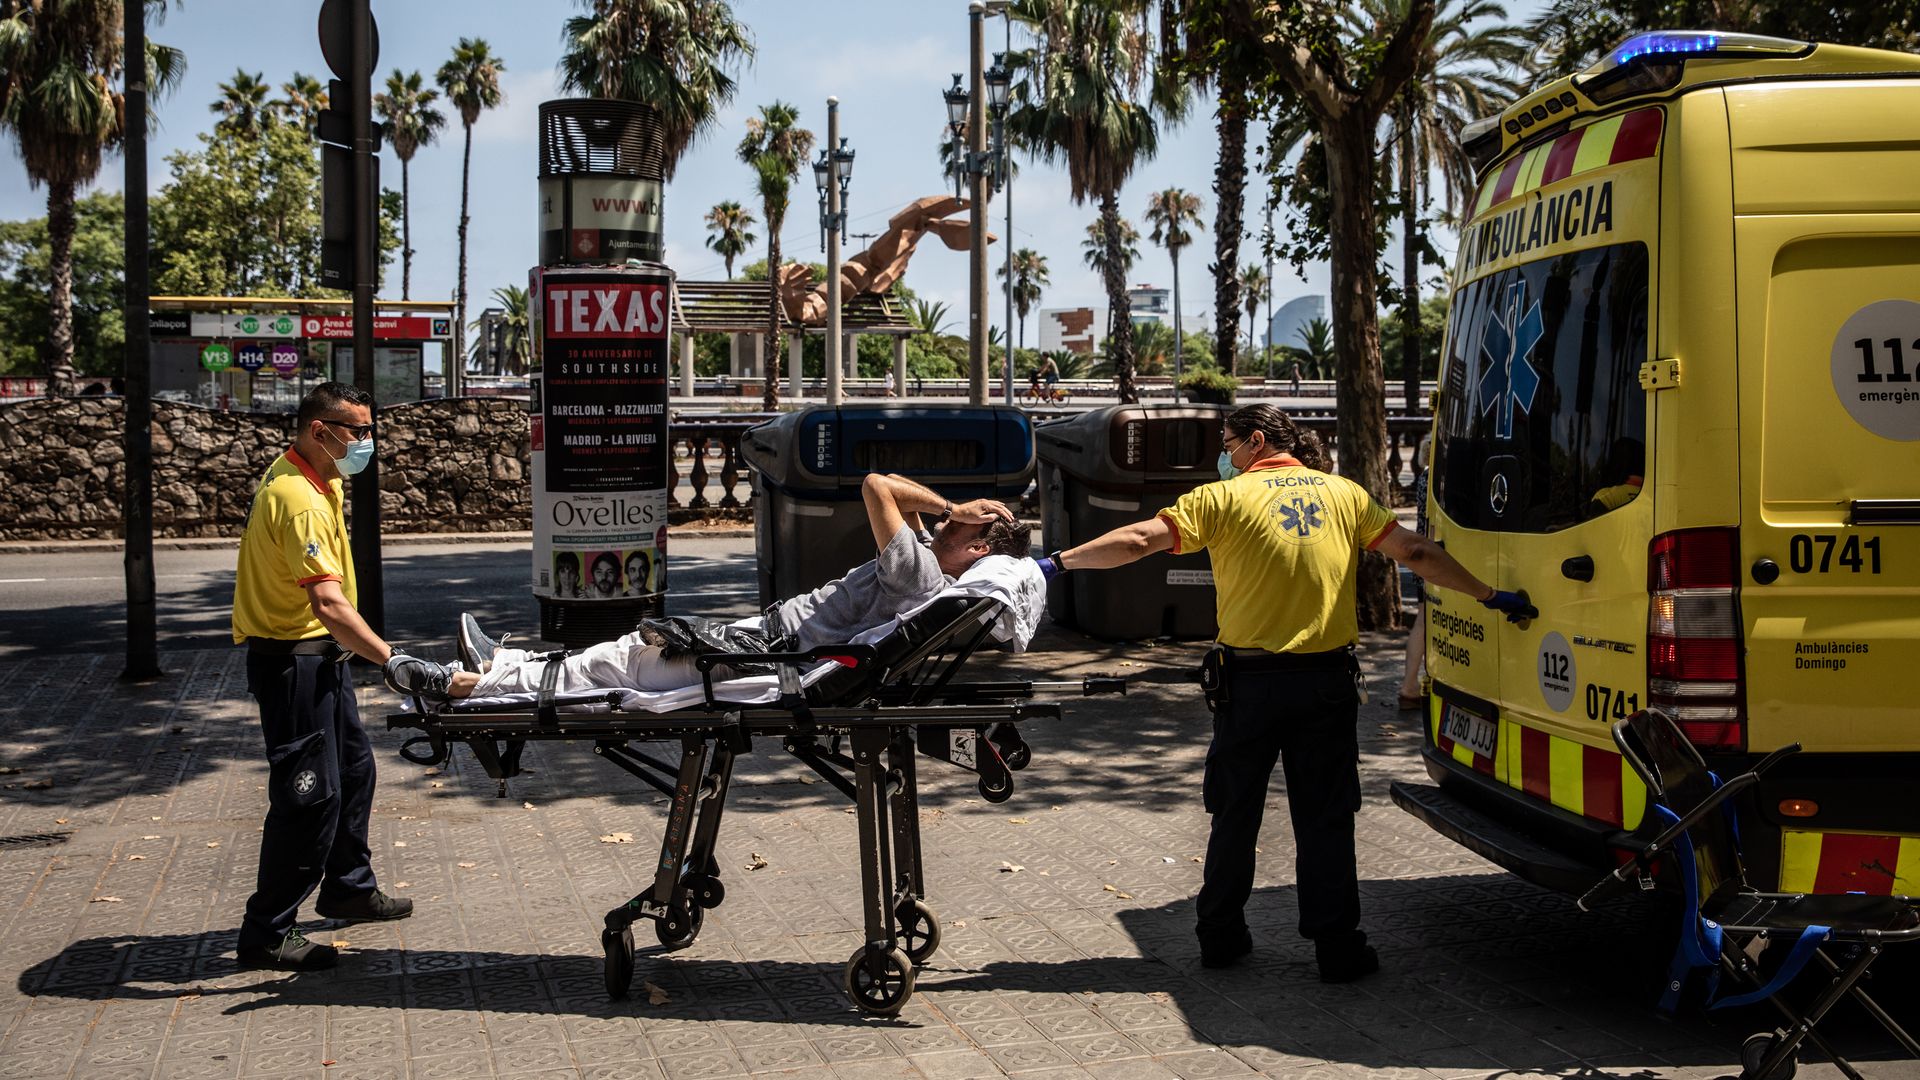 Paramedics tending to a patient in Barcelona, Spain, during a heat wave in July 2022.